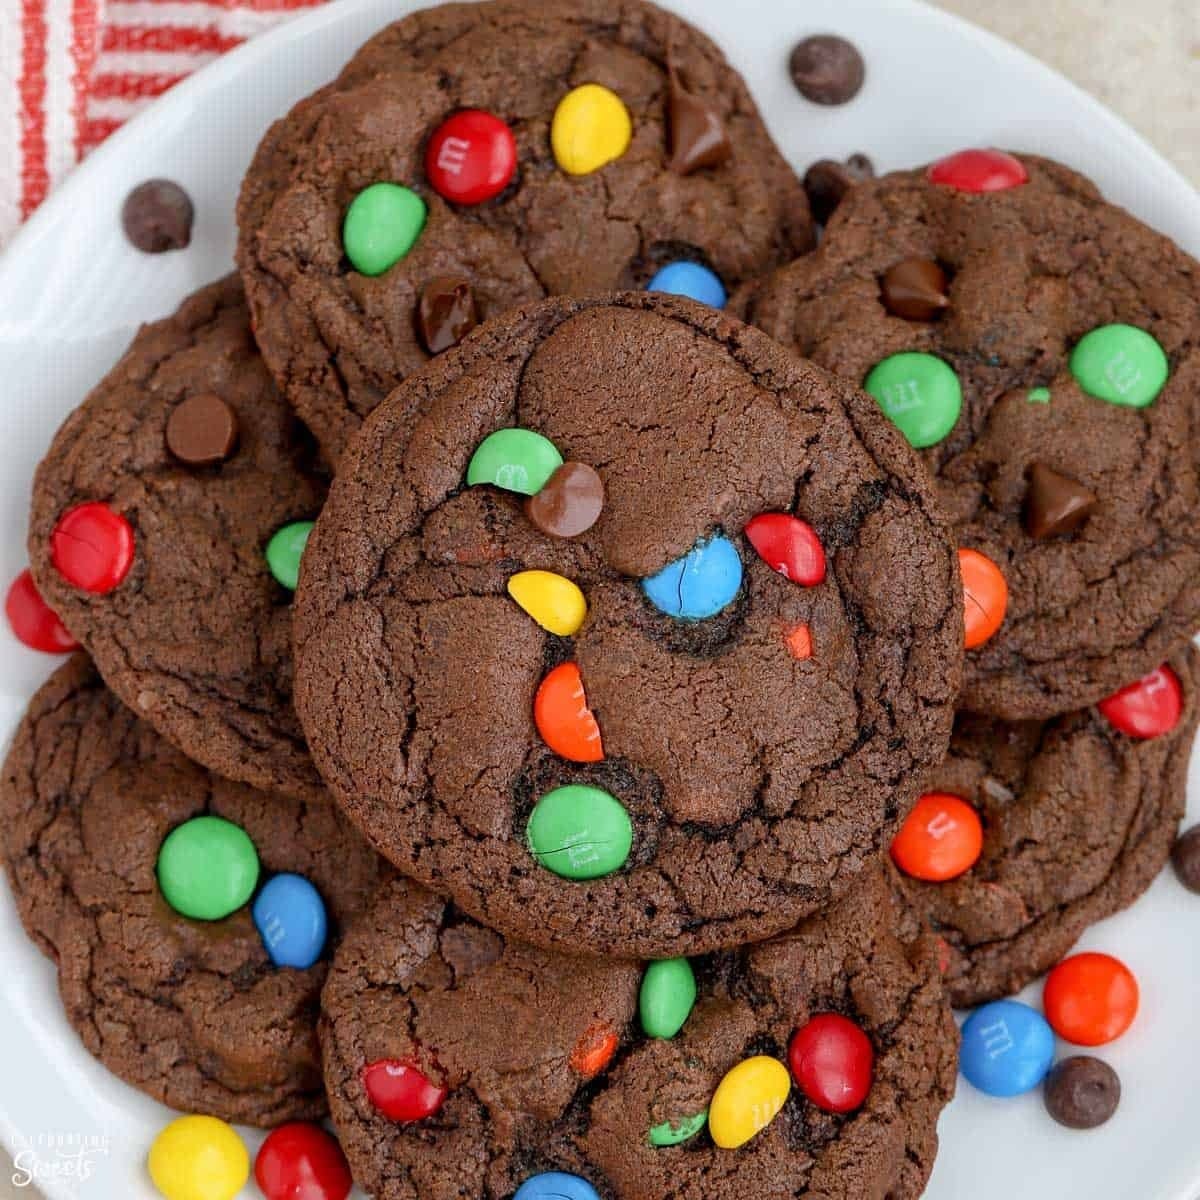 M&M’S CHOCOLATE COOKIE MIX - My American Shop